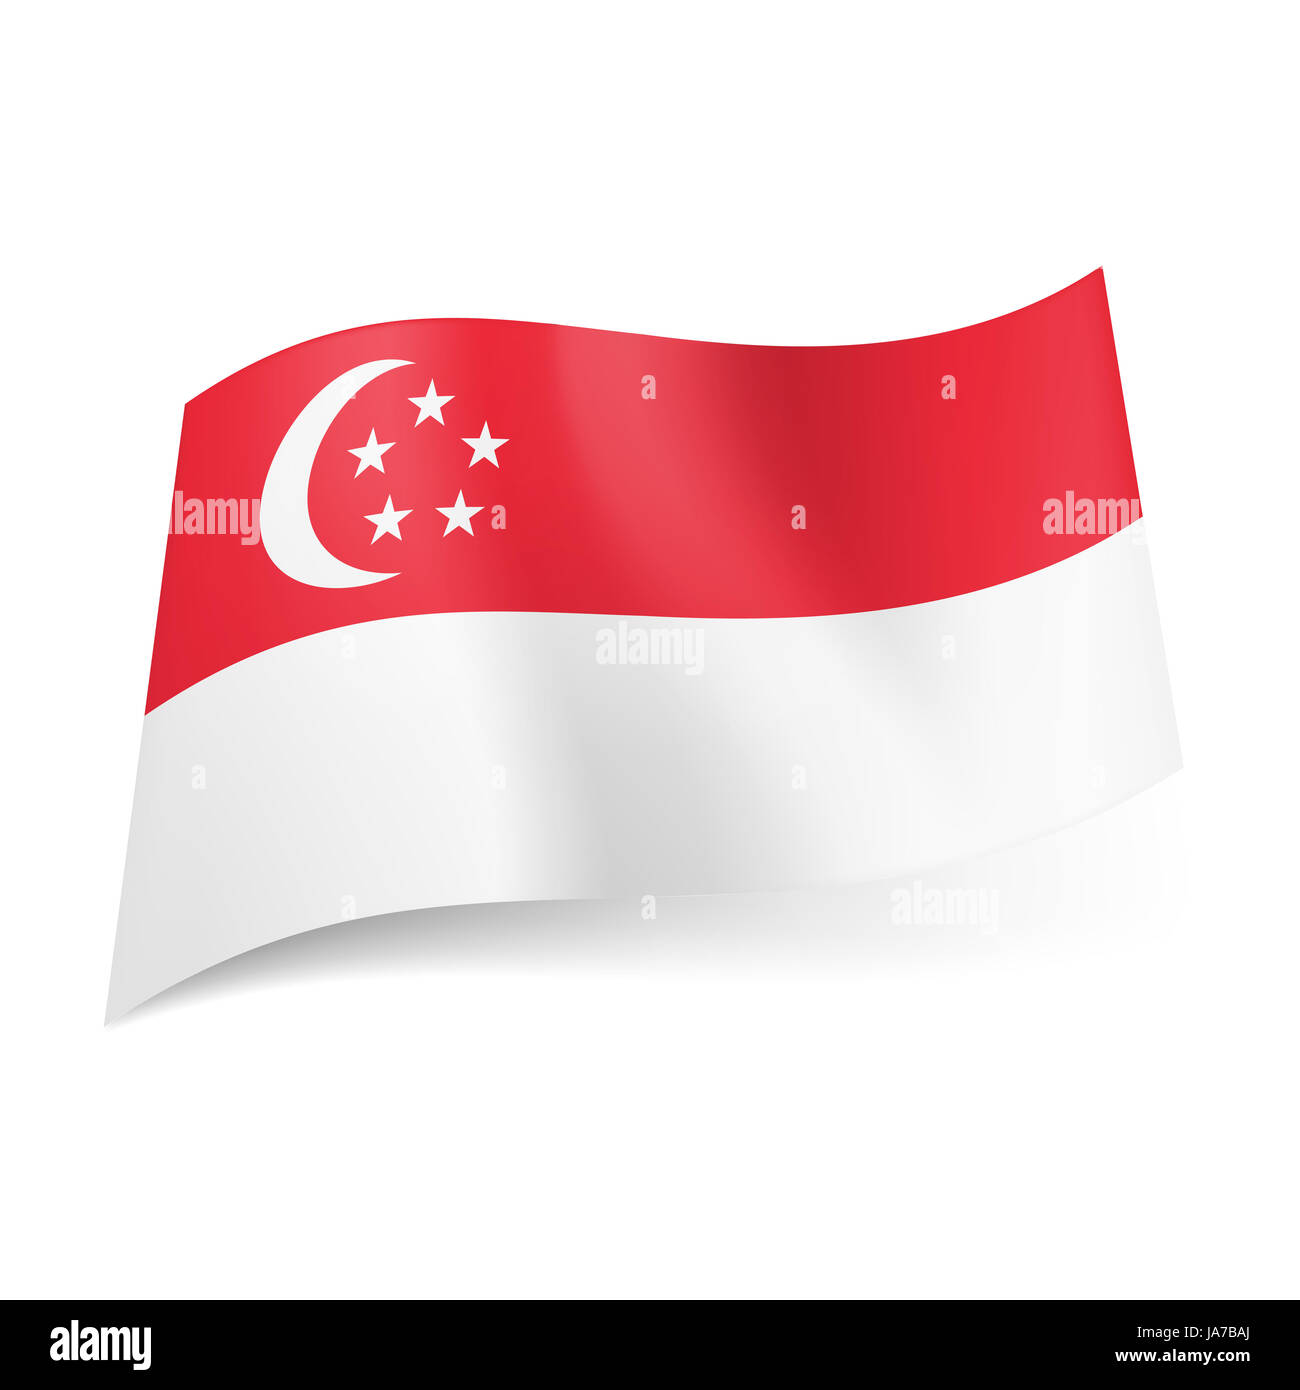 National flag of Singapore: red stripe with crescent moon and five stars in circle above white one. Stock Photo